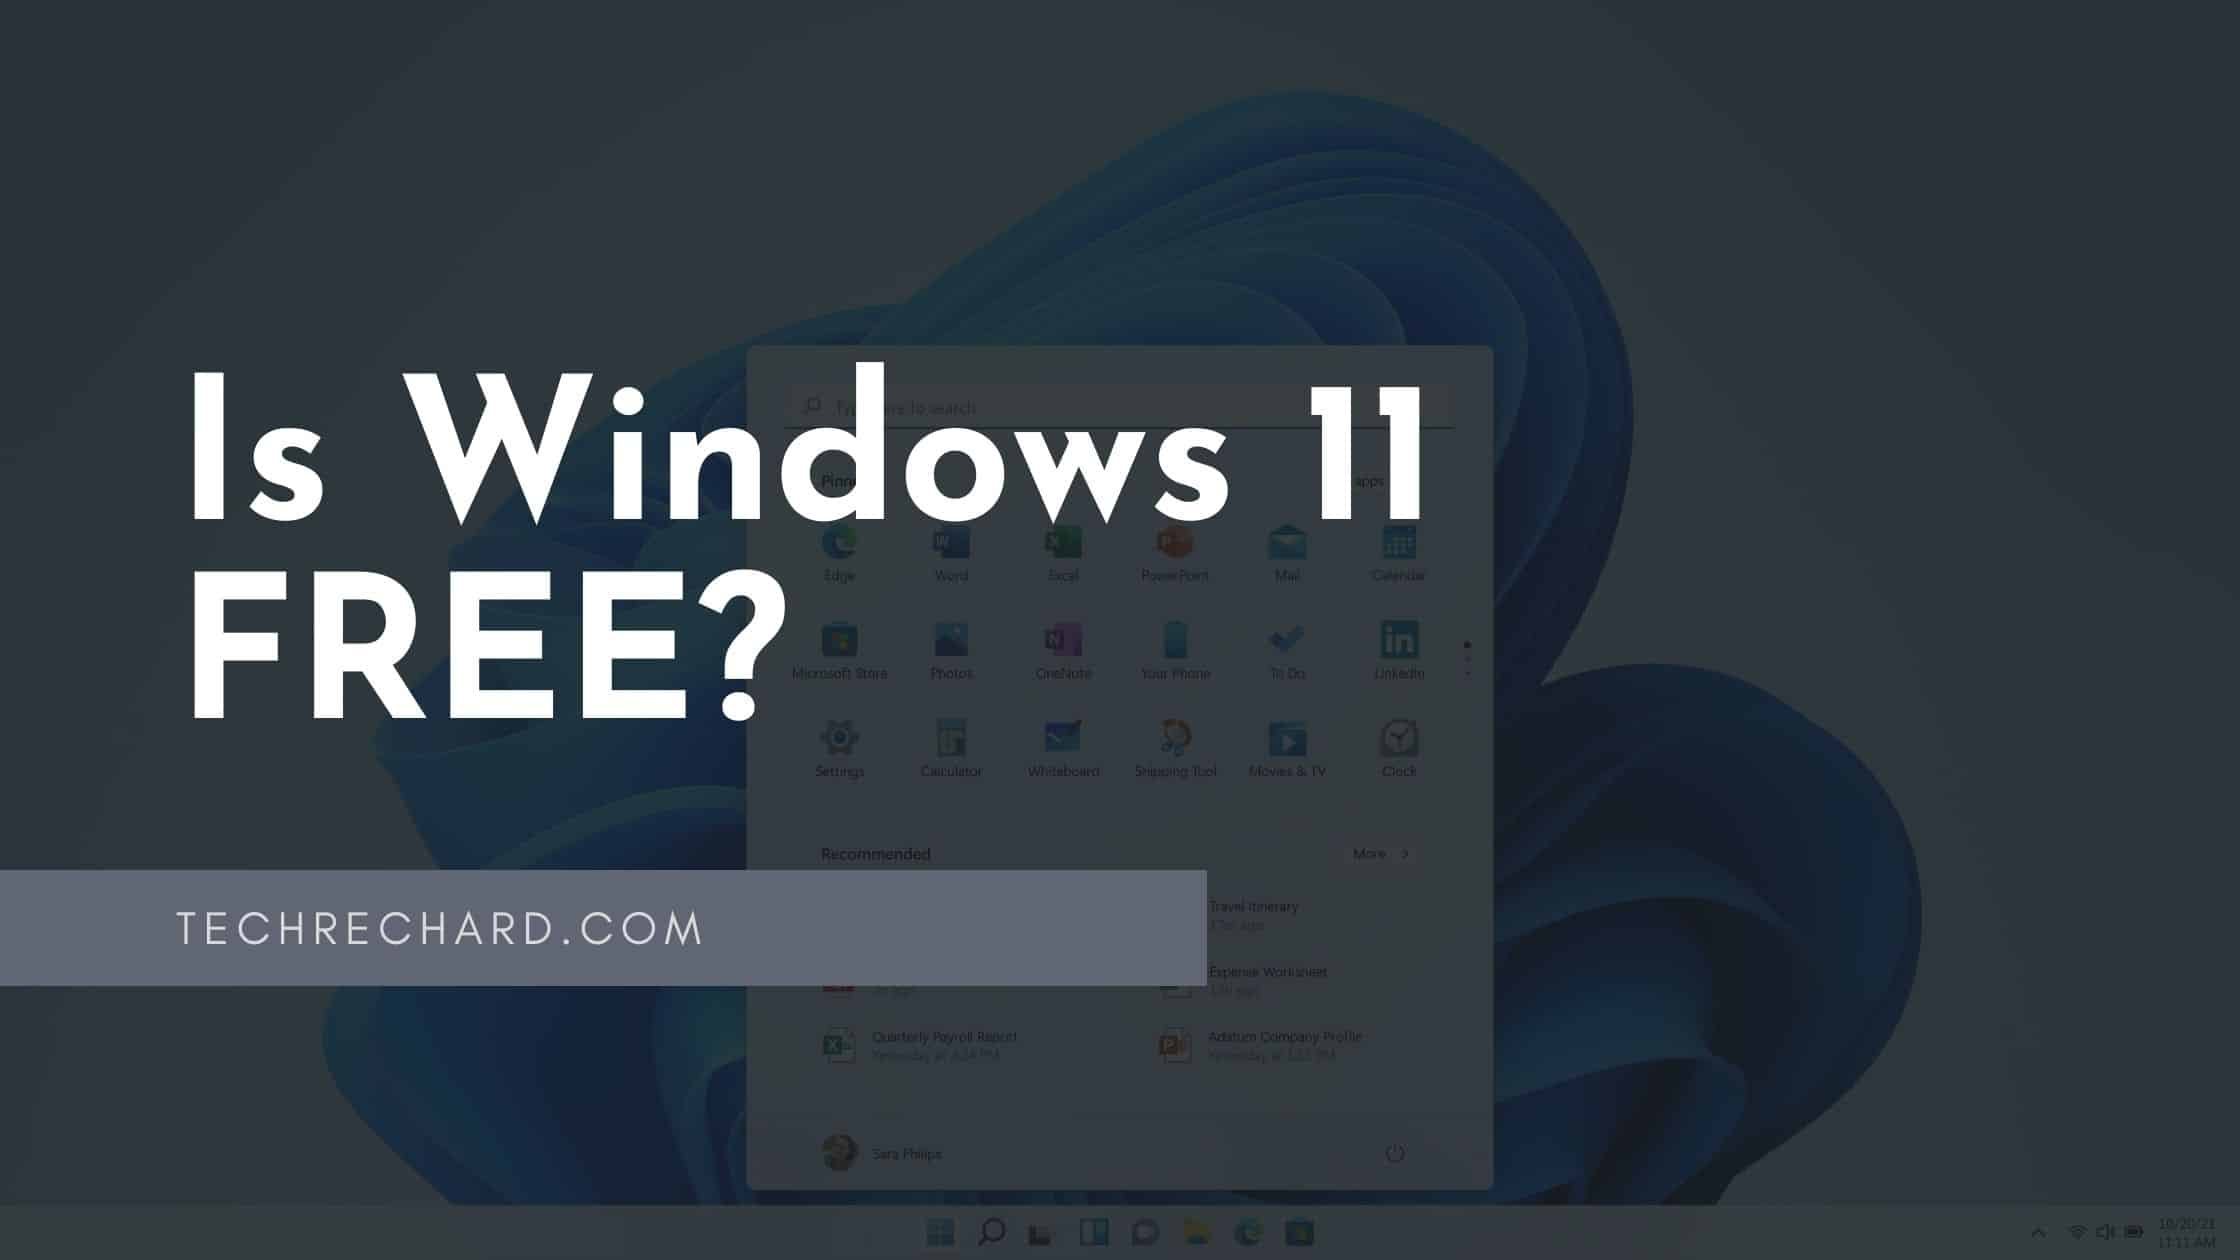 Is Windows 11 a free OS?